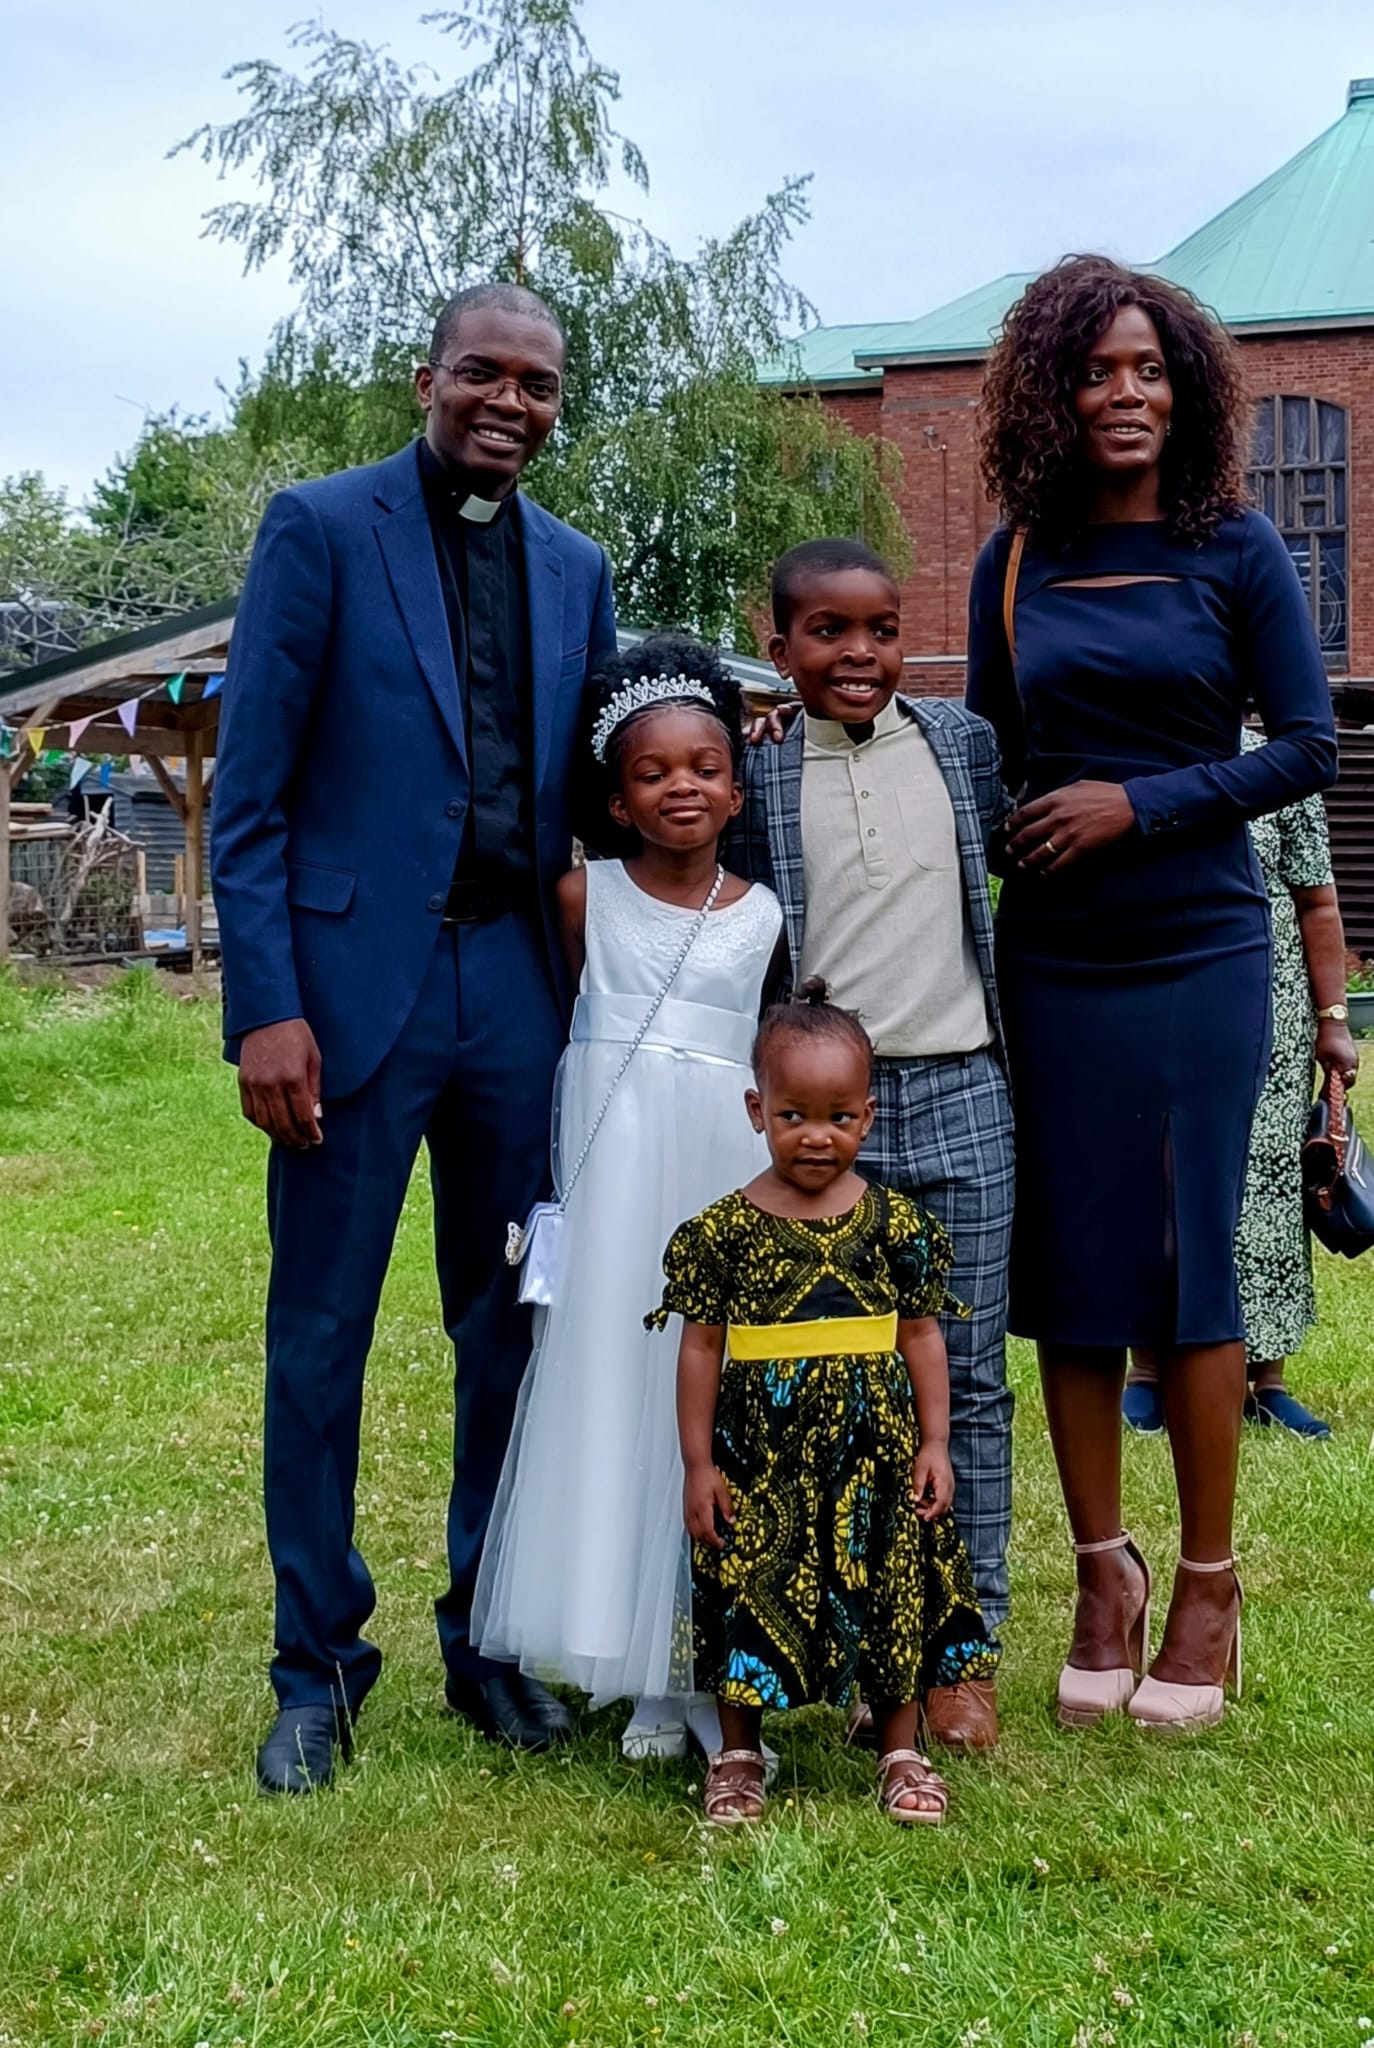 Deacon Davie, in his clerical collar, is joined by his wife and children, including his daughter wearing her First holy Communion Dress